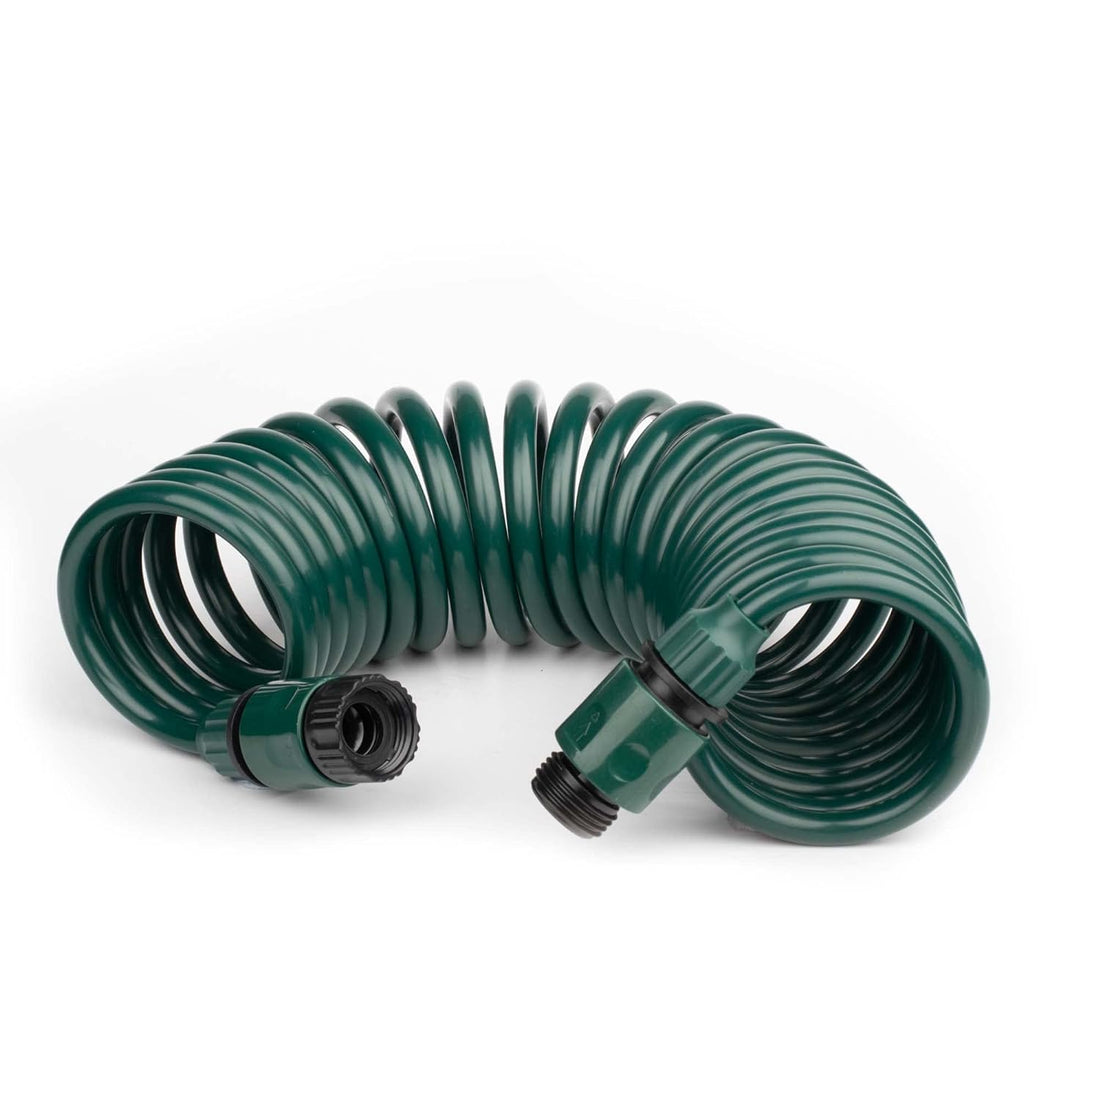 FUNJEE Lightweight EVA Coil Hose, 20 FT Garden Hose with Nipple QD Fittings, Female and Male Thread QD Fittings, Garden Tool Set for Lawn, Patio, Home(20FT, Green)